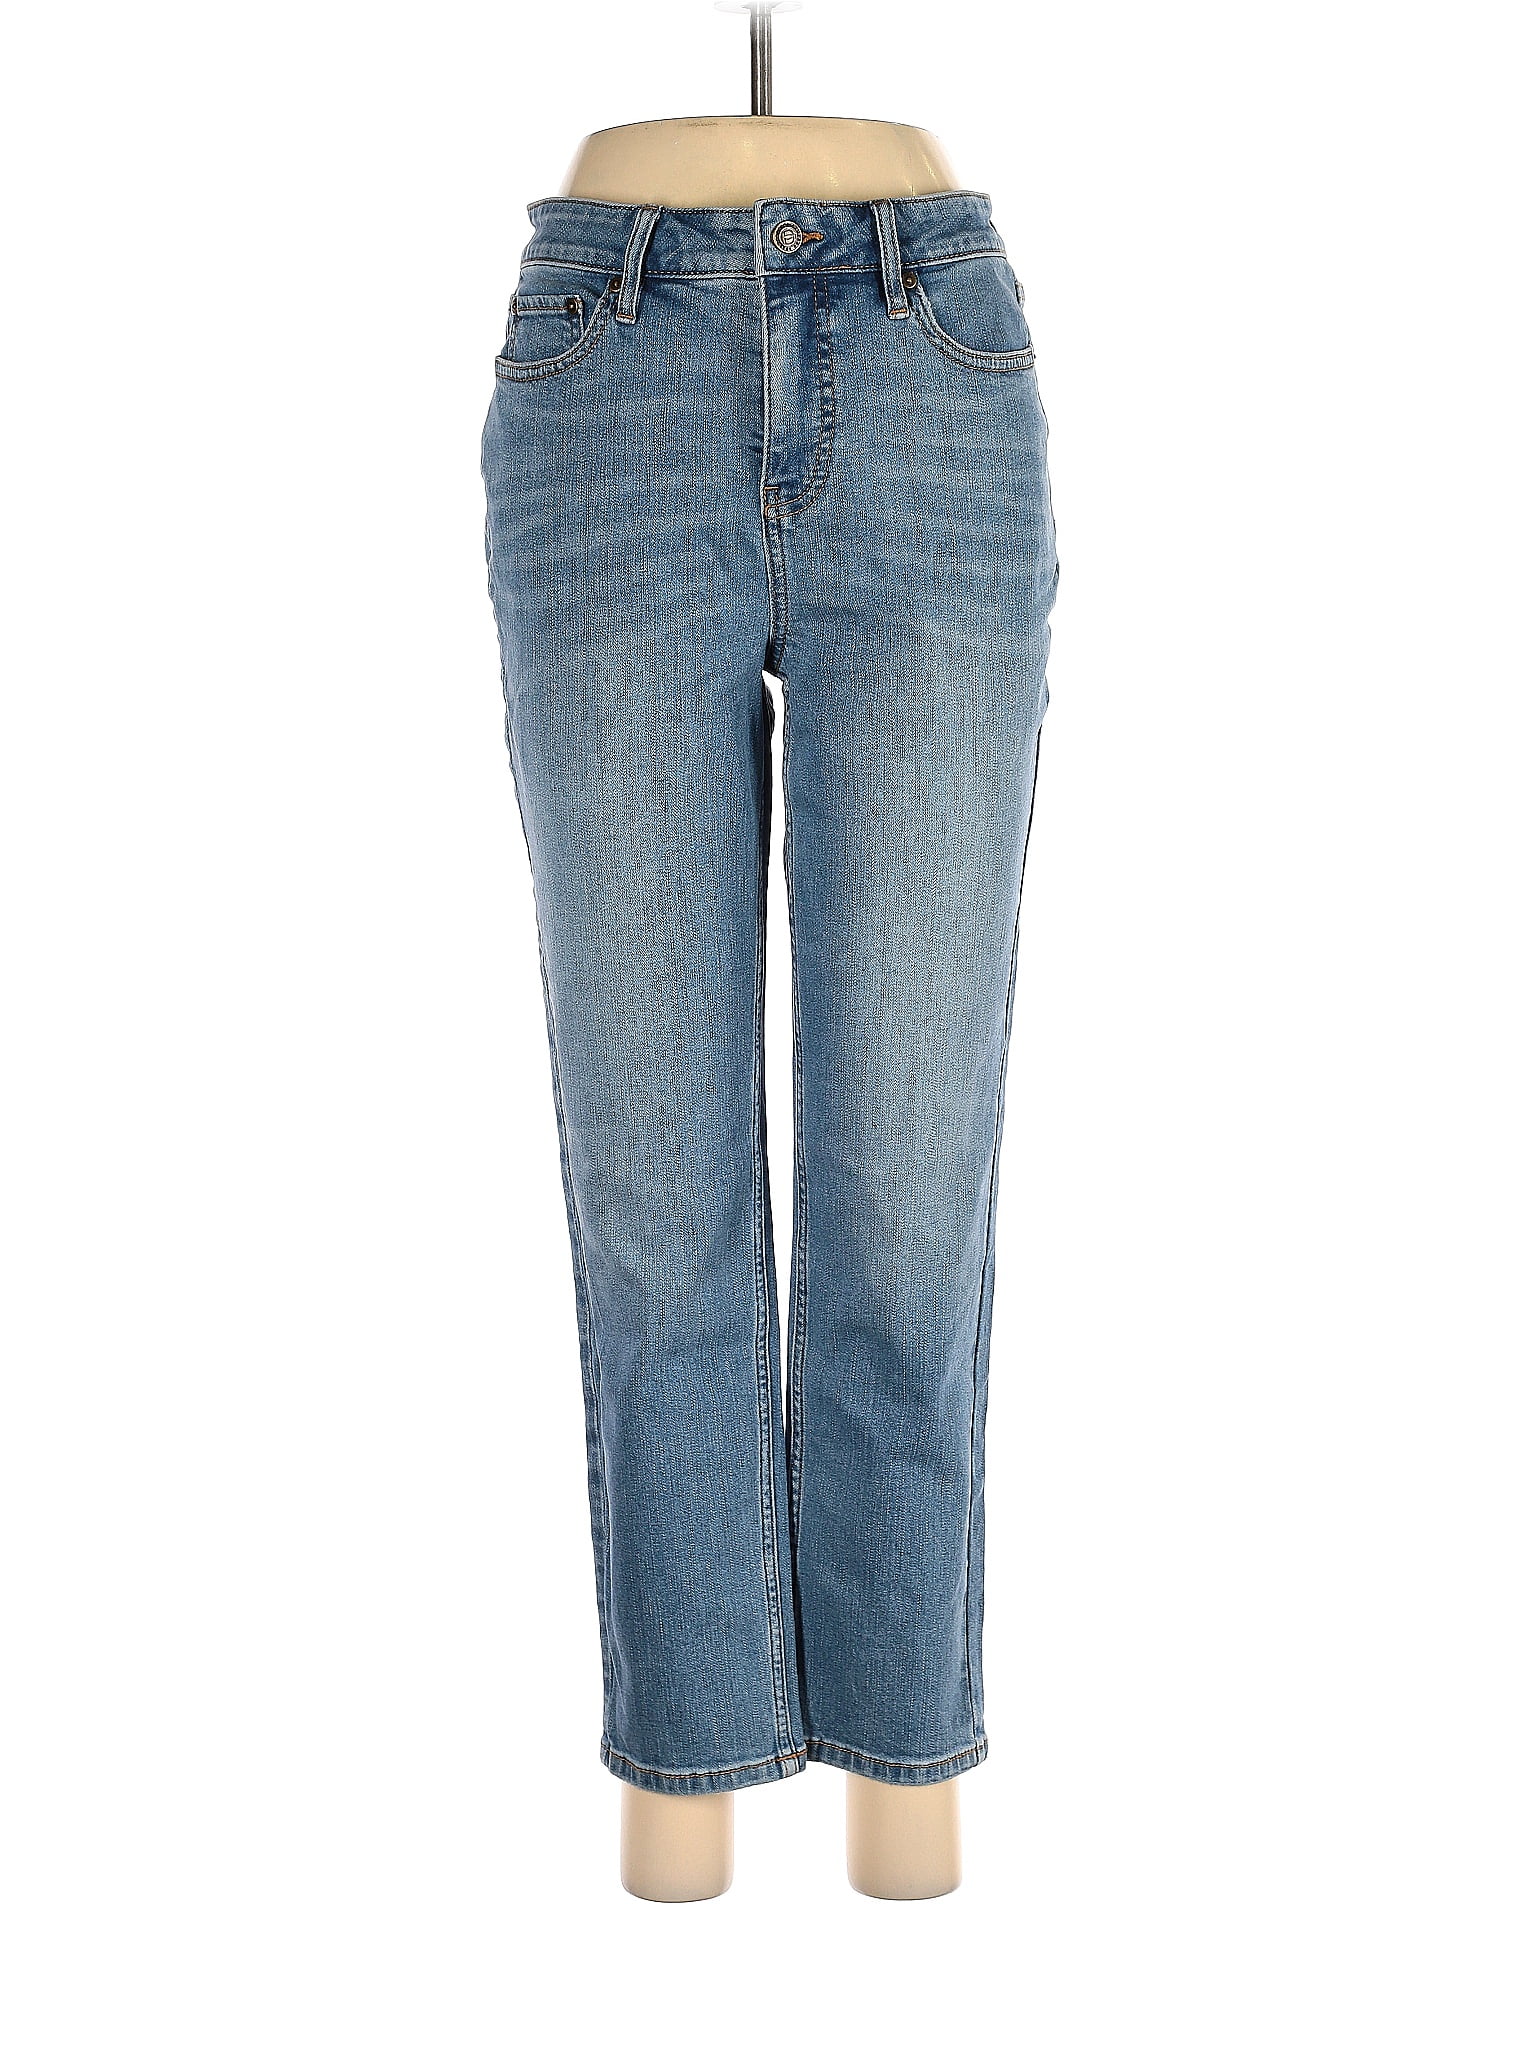 Candace Cameron Bure Blue Jeans Size 6 - 66% off | thredUP